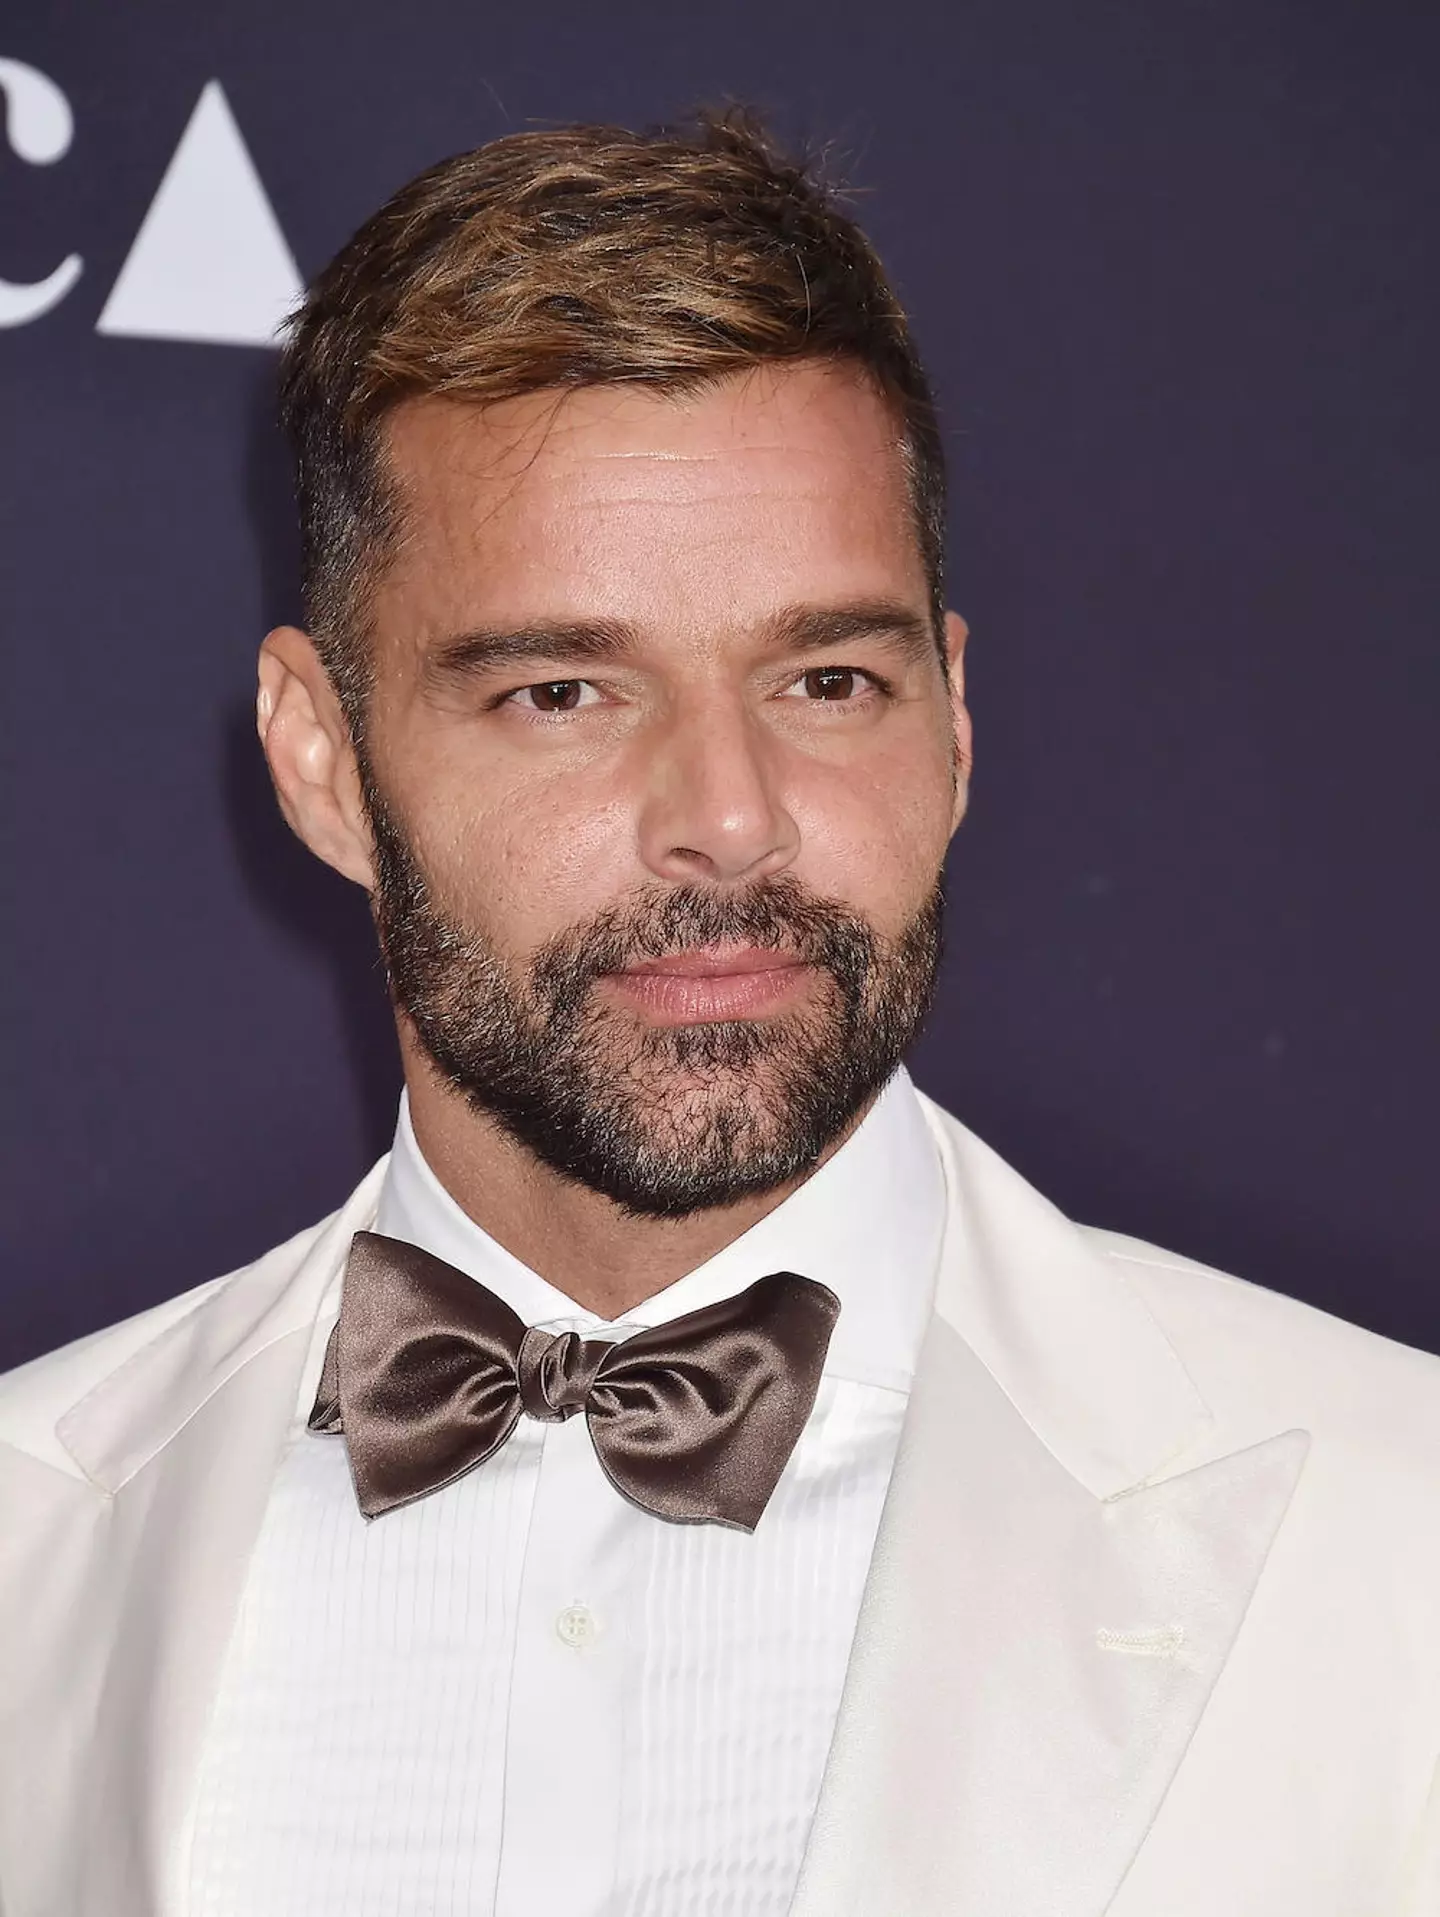 The charges against Ricky Martin have been dropped.